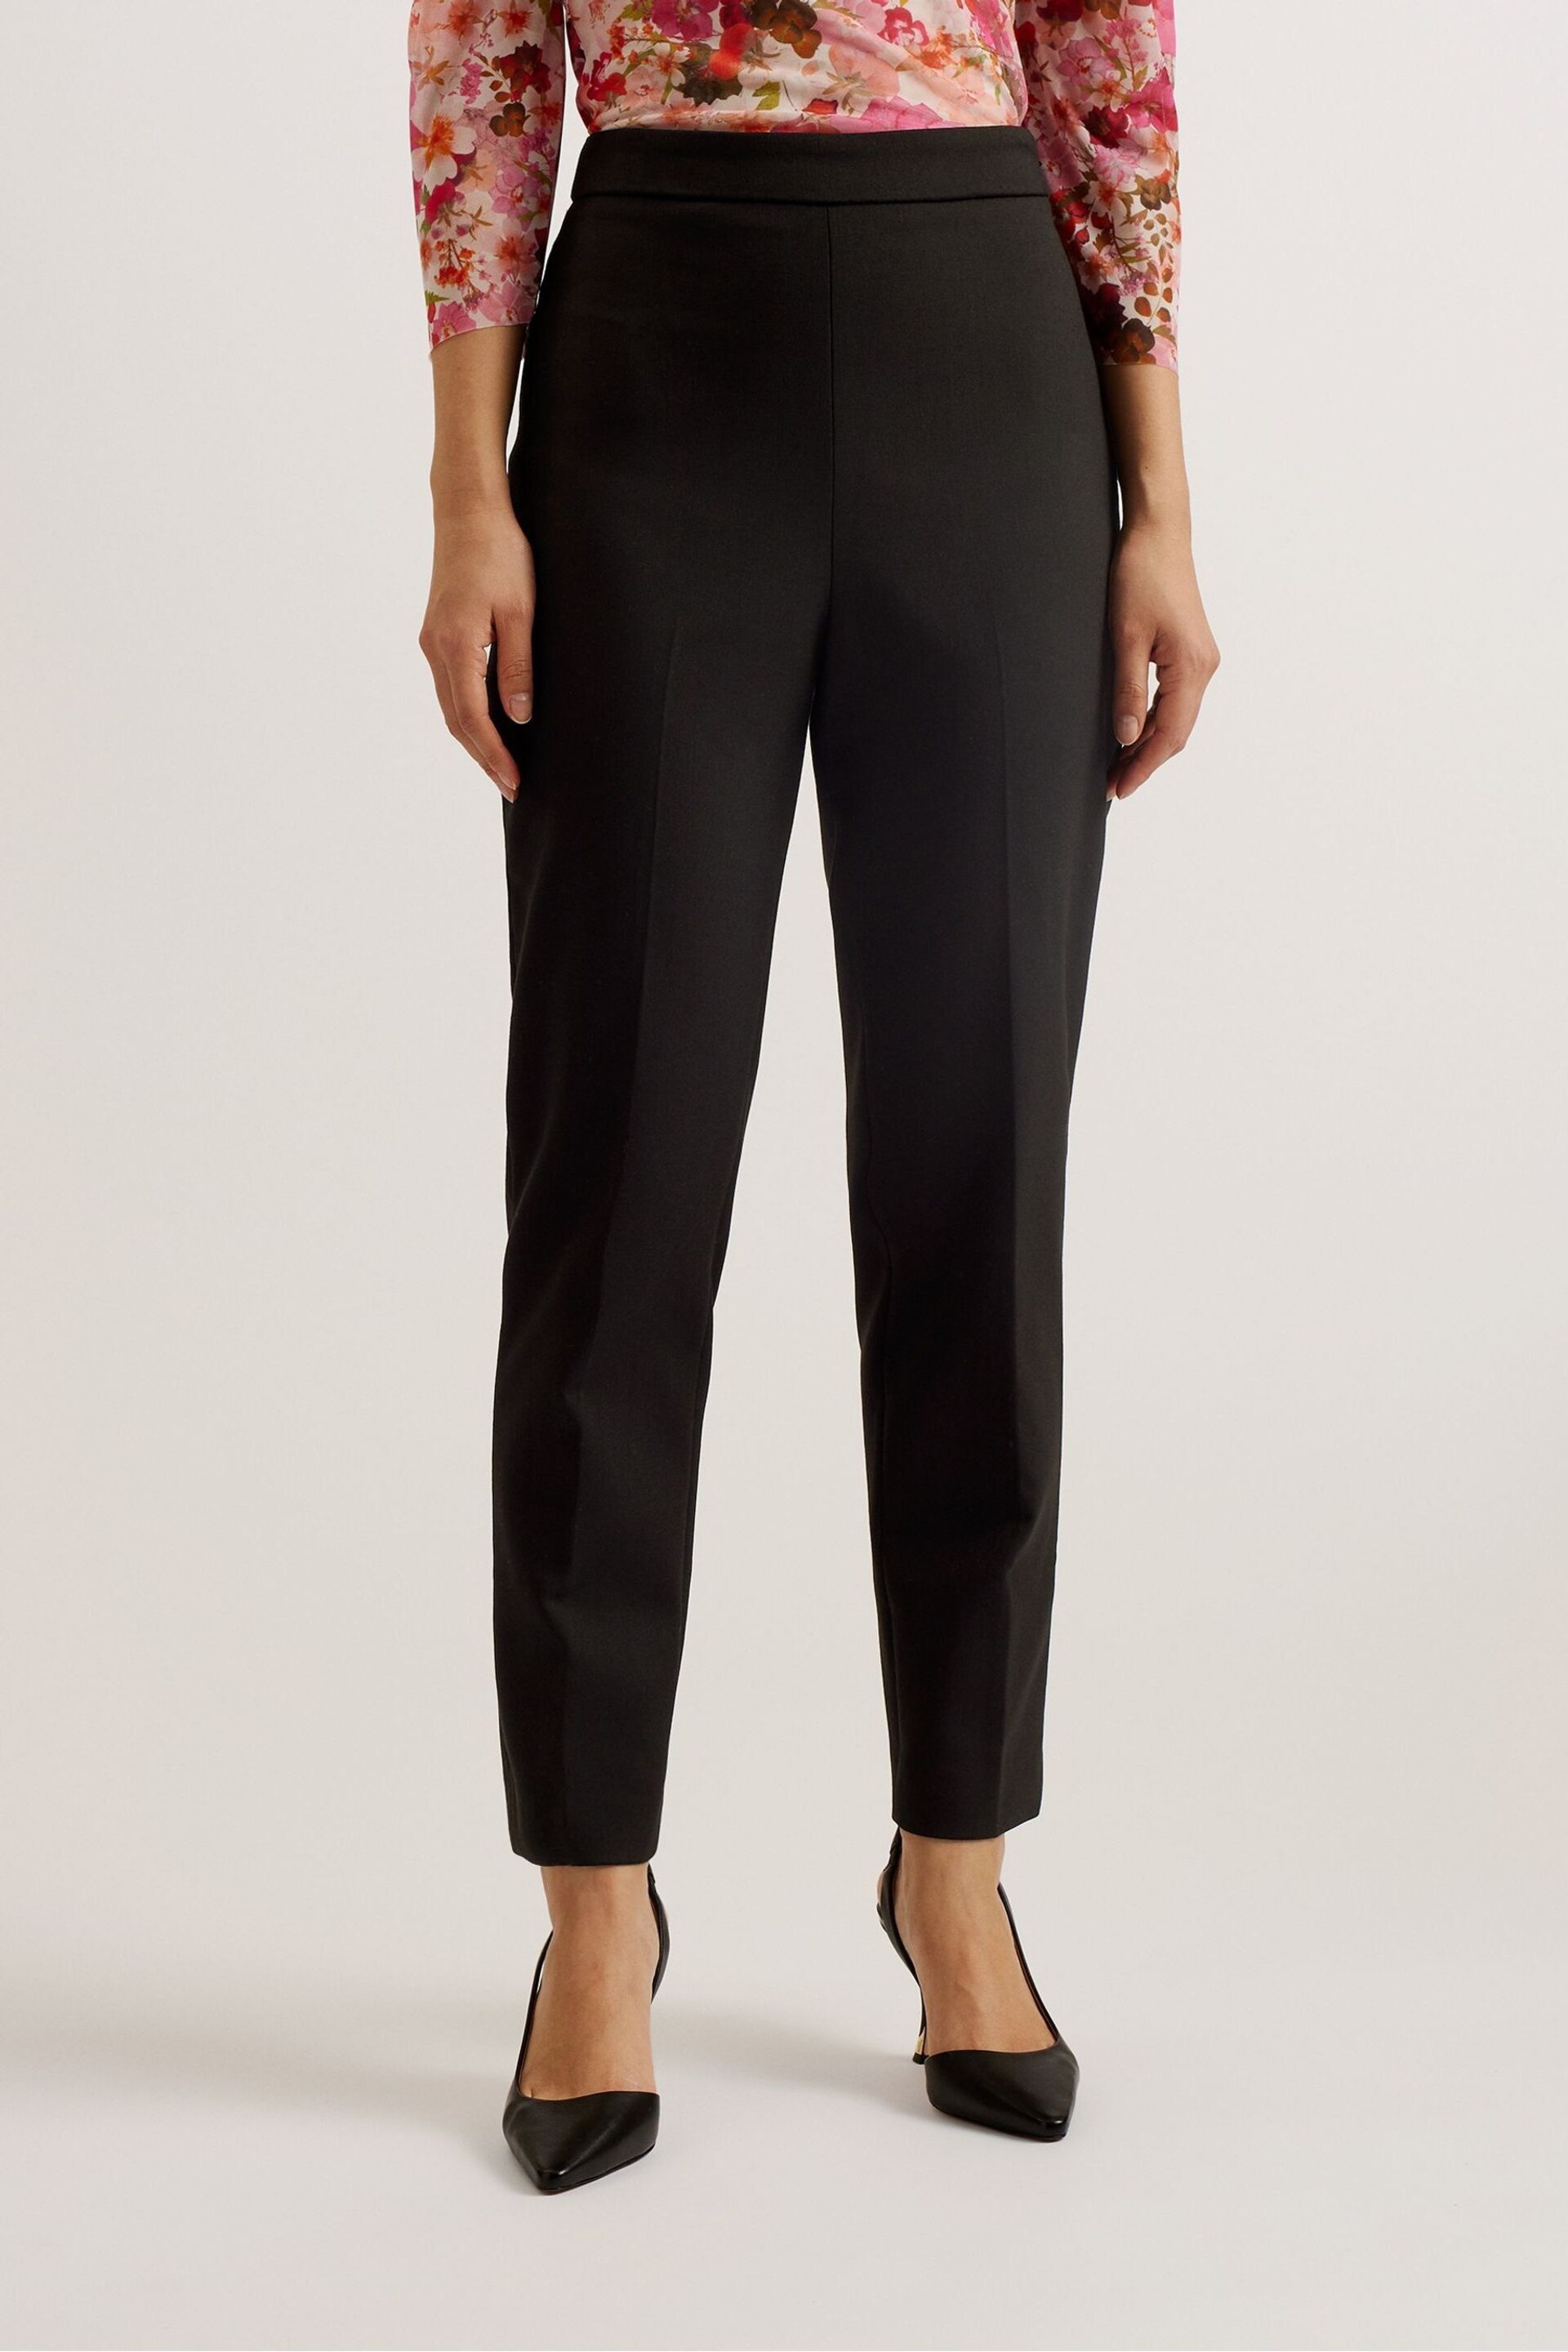 Ted Baker Black Manabut Tailored Trousers - Image 2 of 5